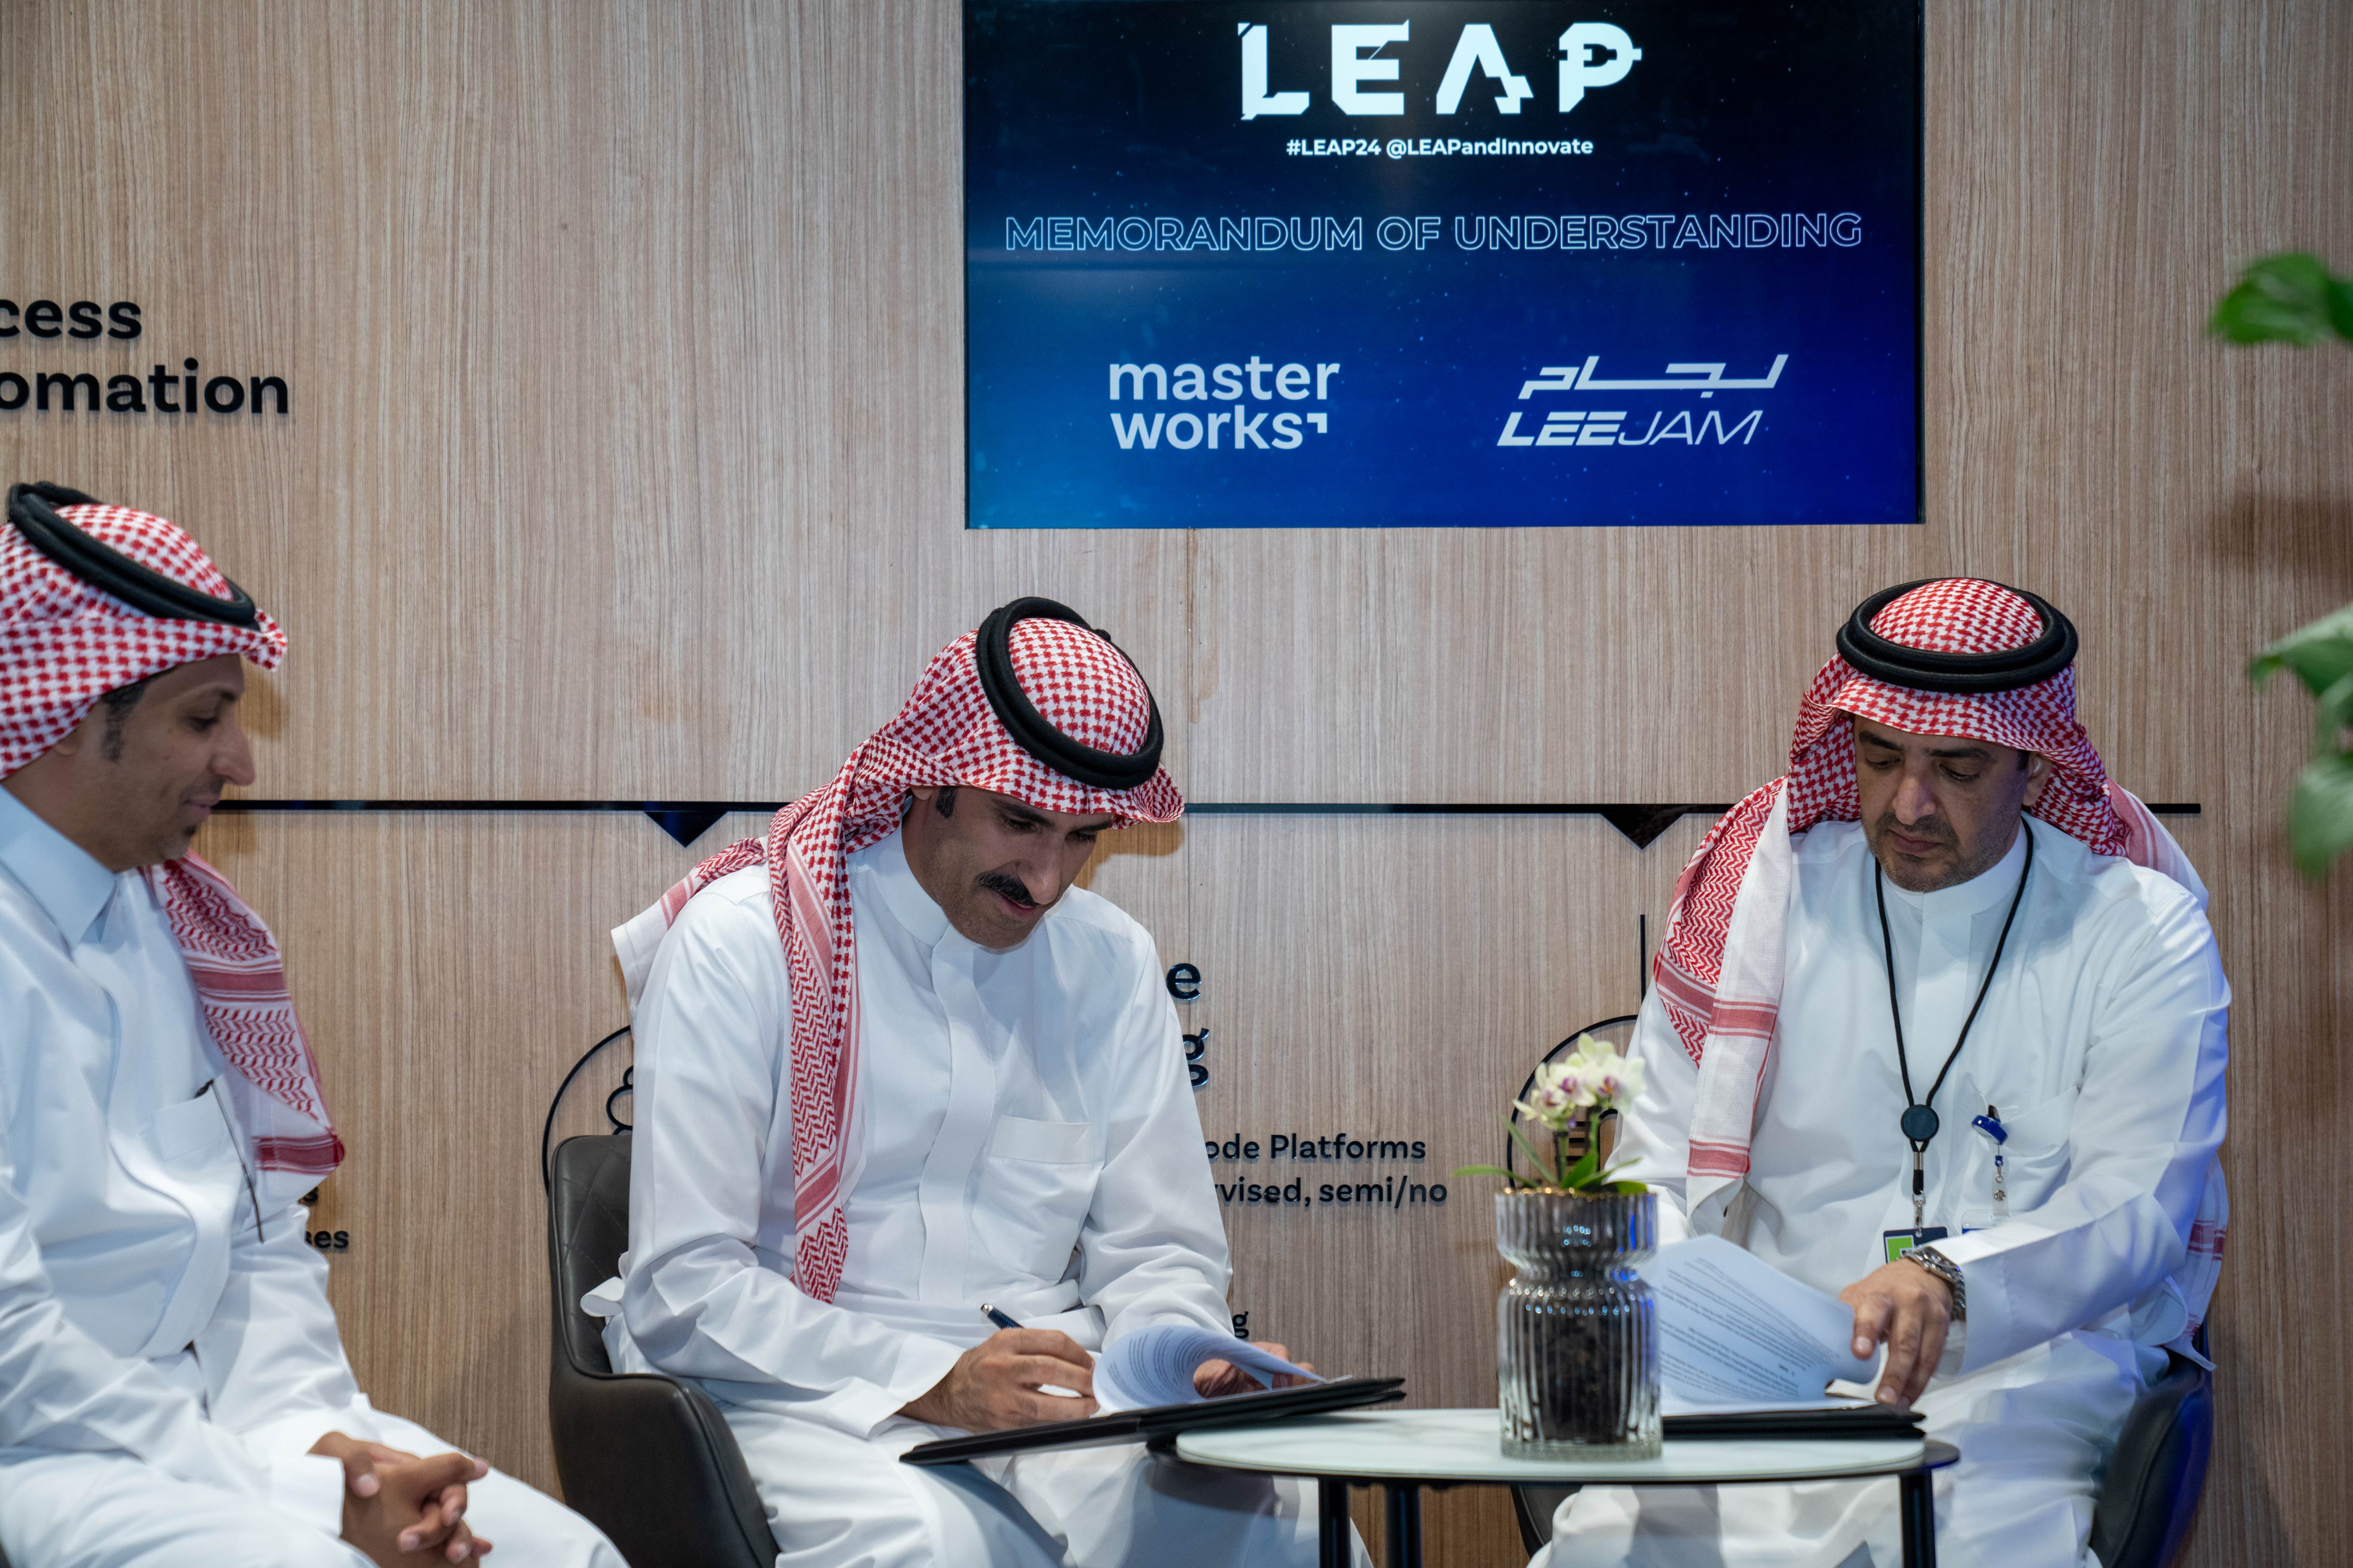 Signature of a Contract for the Utilization of AI Technologies to Enhance Digital Services and Improve Customer Experience at Leejam Sports company with Master Works